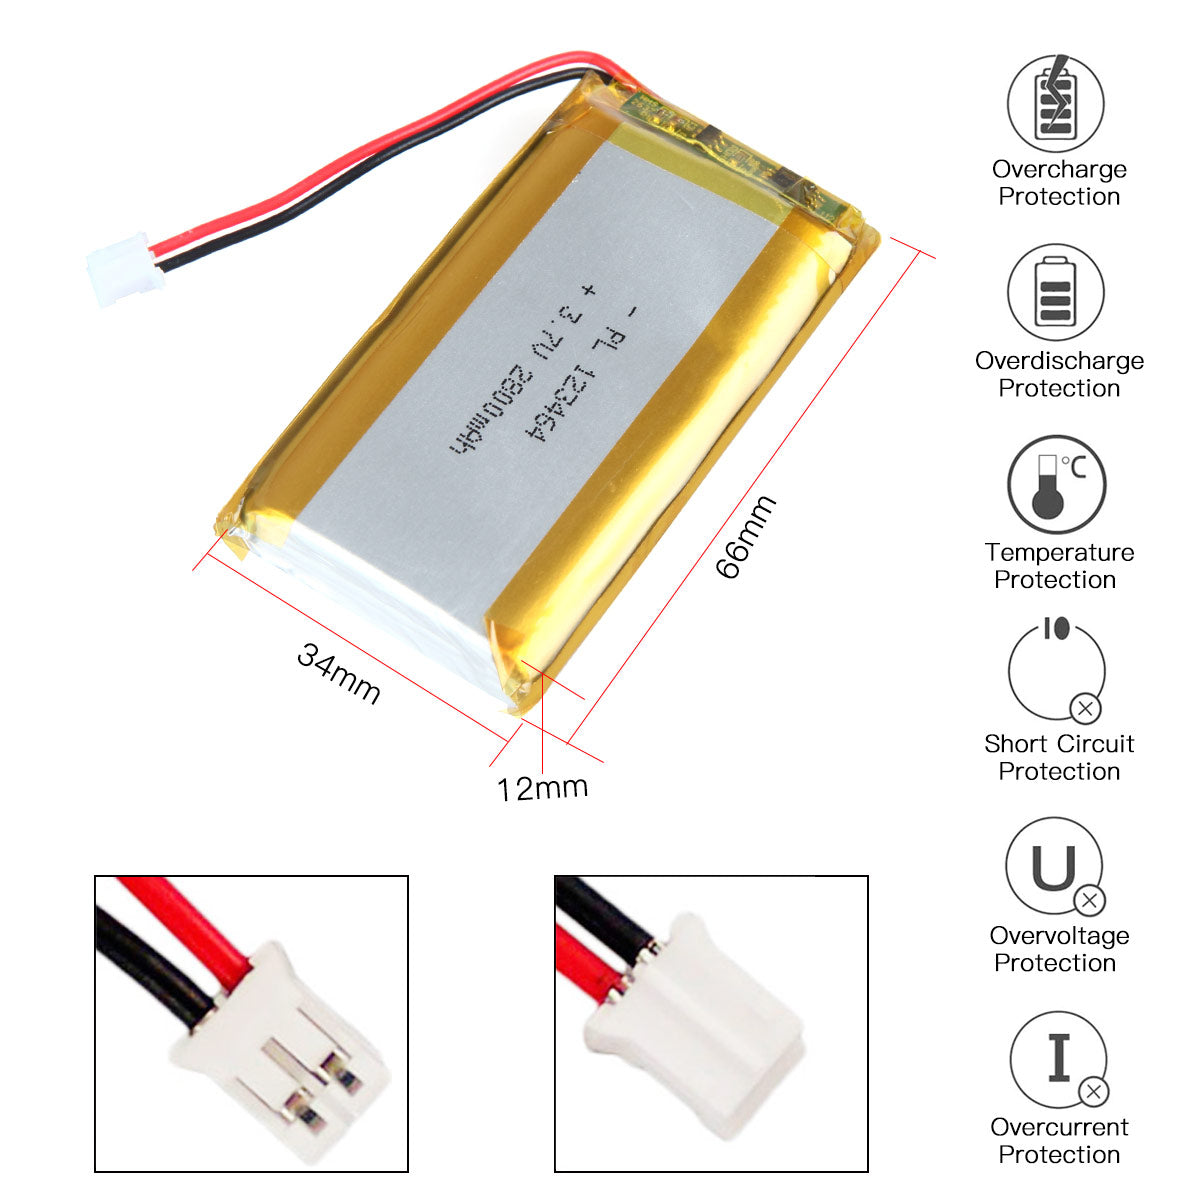 YDL 3.7V 2800mAh 123464 Rechargeable Lithium Polymer Battery Length 66mm